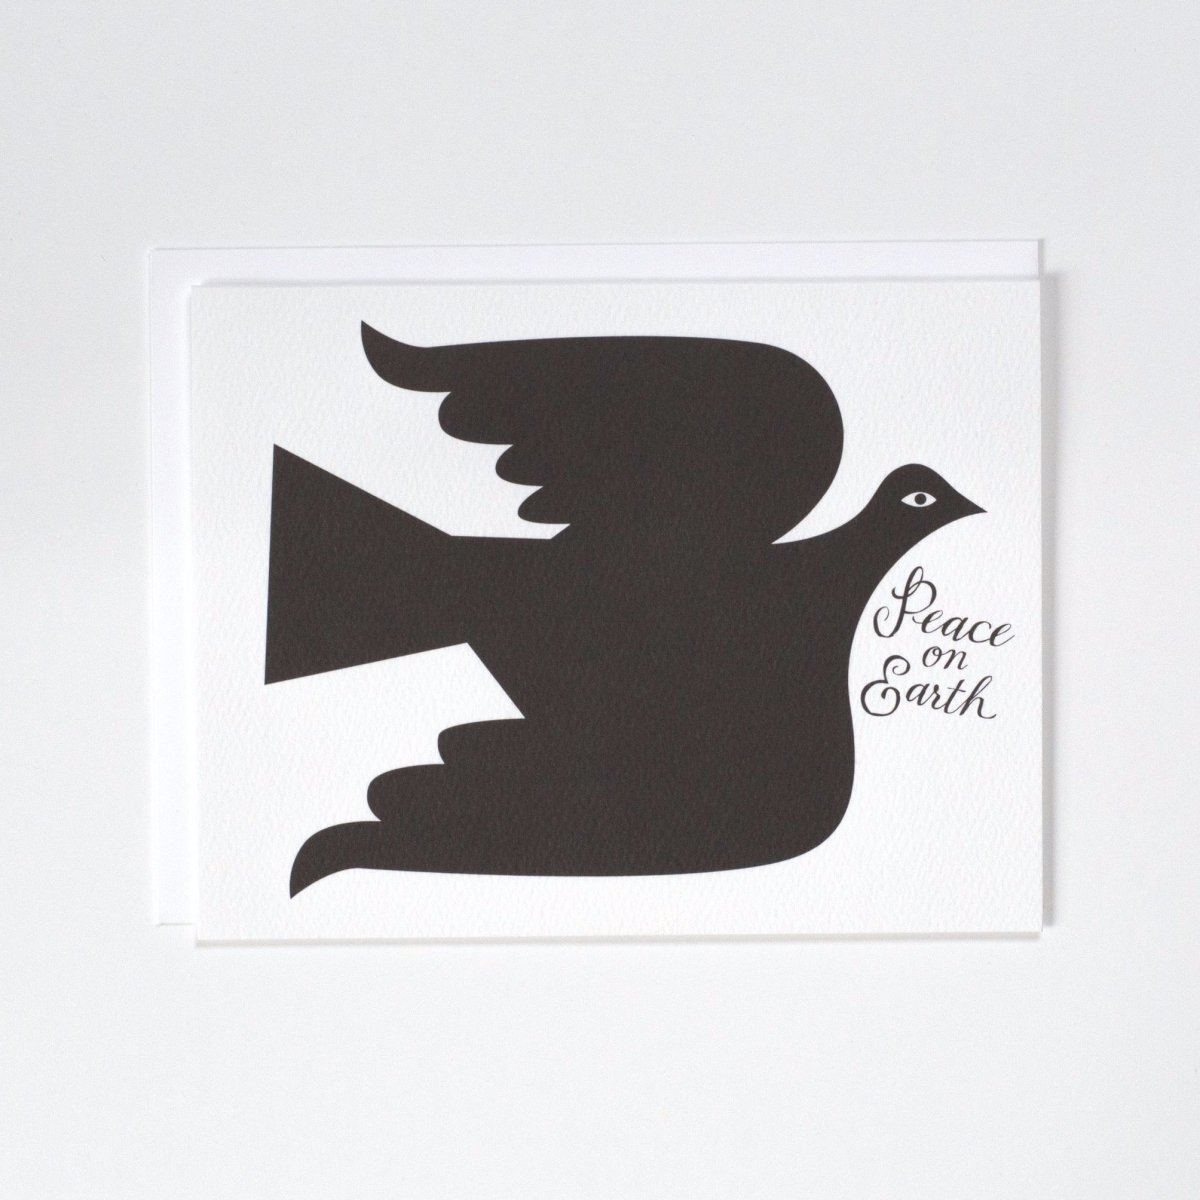 A black dove against a white background with the message: "PEACE ON EARTH." Made with recycled paper by Banquet Atelier in Vancouver, British Columbia, Canada. 